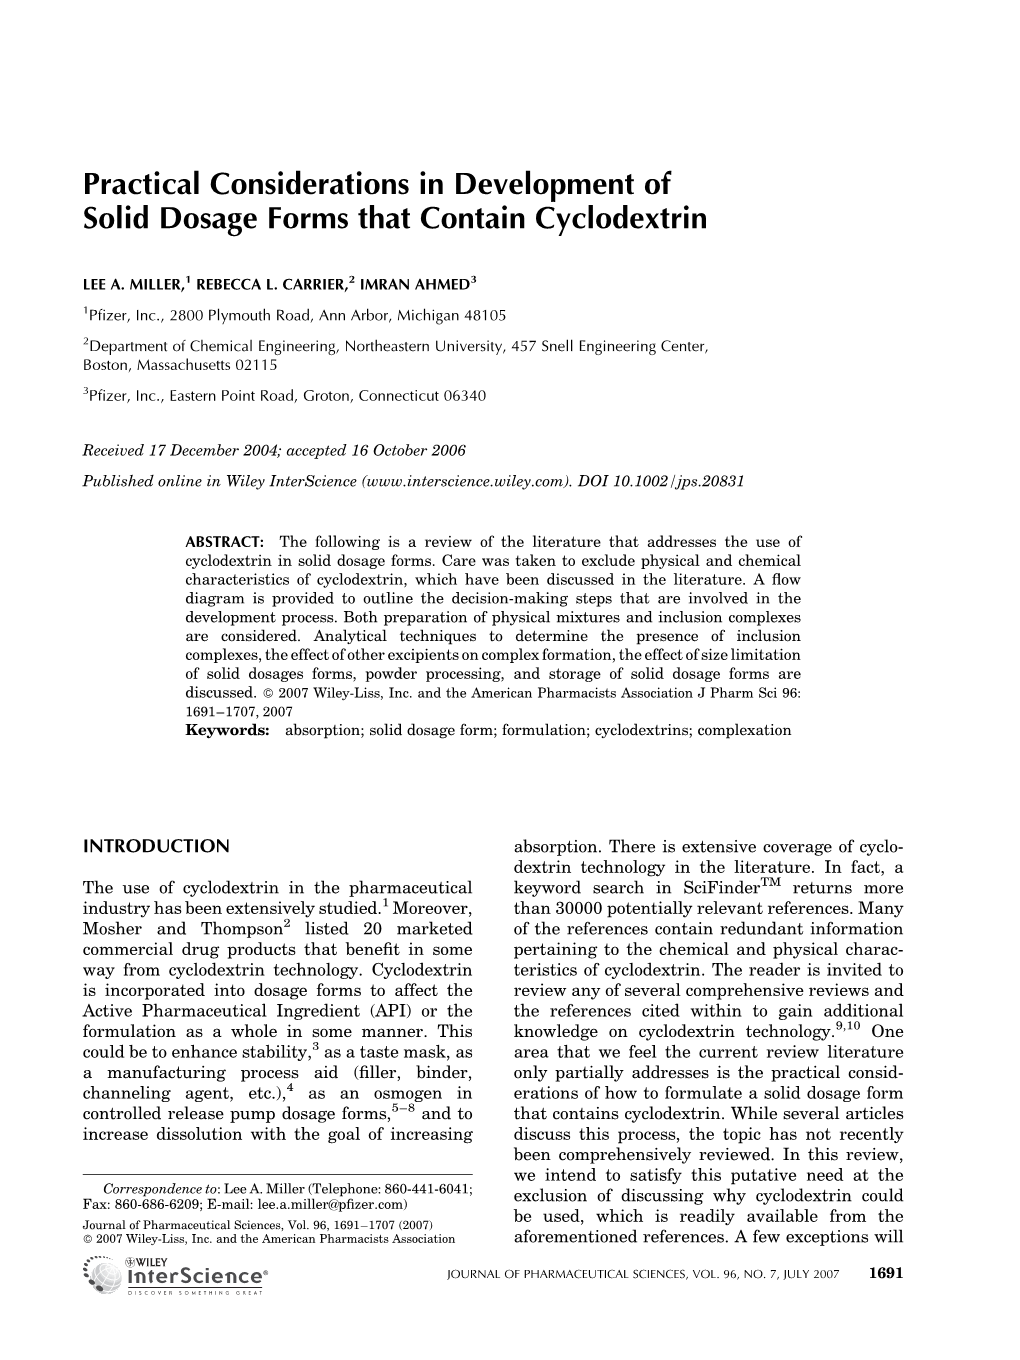 Practical Considerations in Development of Solid Dosage Forms That Contain Cyclodextrin